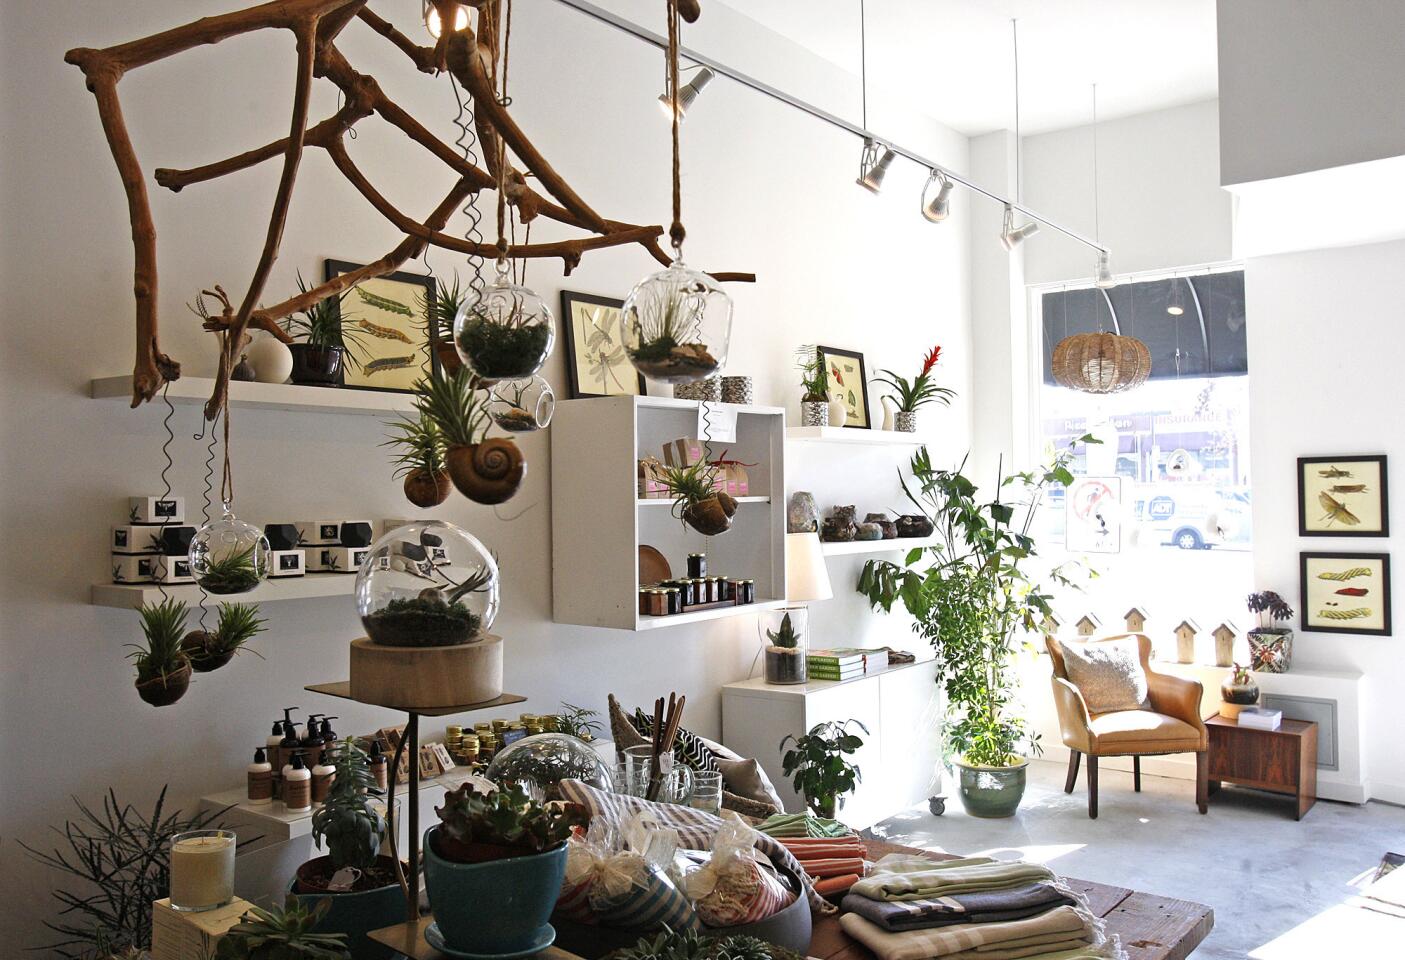 Acorn stocks a mix of terrariums, ceramics, botanical art and other gifts. The store is on Colorado Boulevard the Eagle Rock neighborhood of Los Angeles.